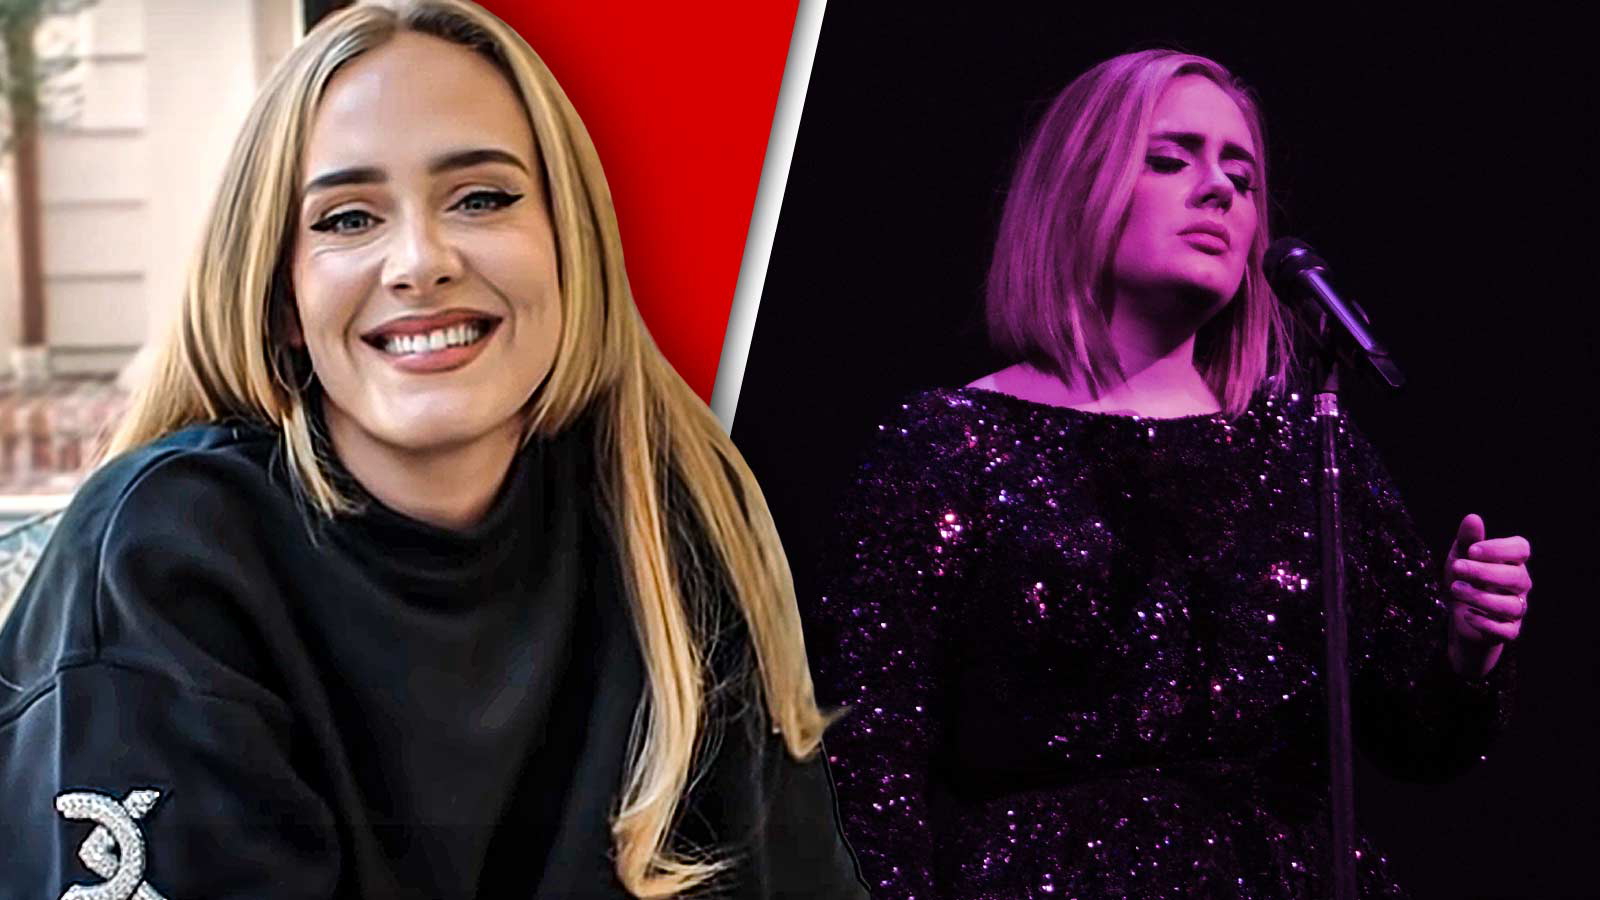 “I want to do other creative things”: Adele Announcing Her “big break” From Music is Raising Alarm Bells Among Fans For One Terrifying Reason